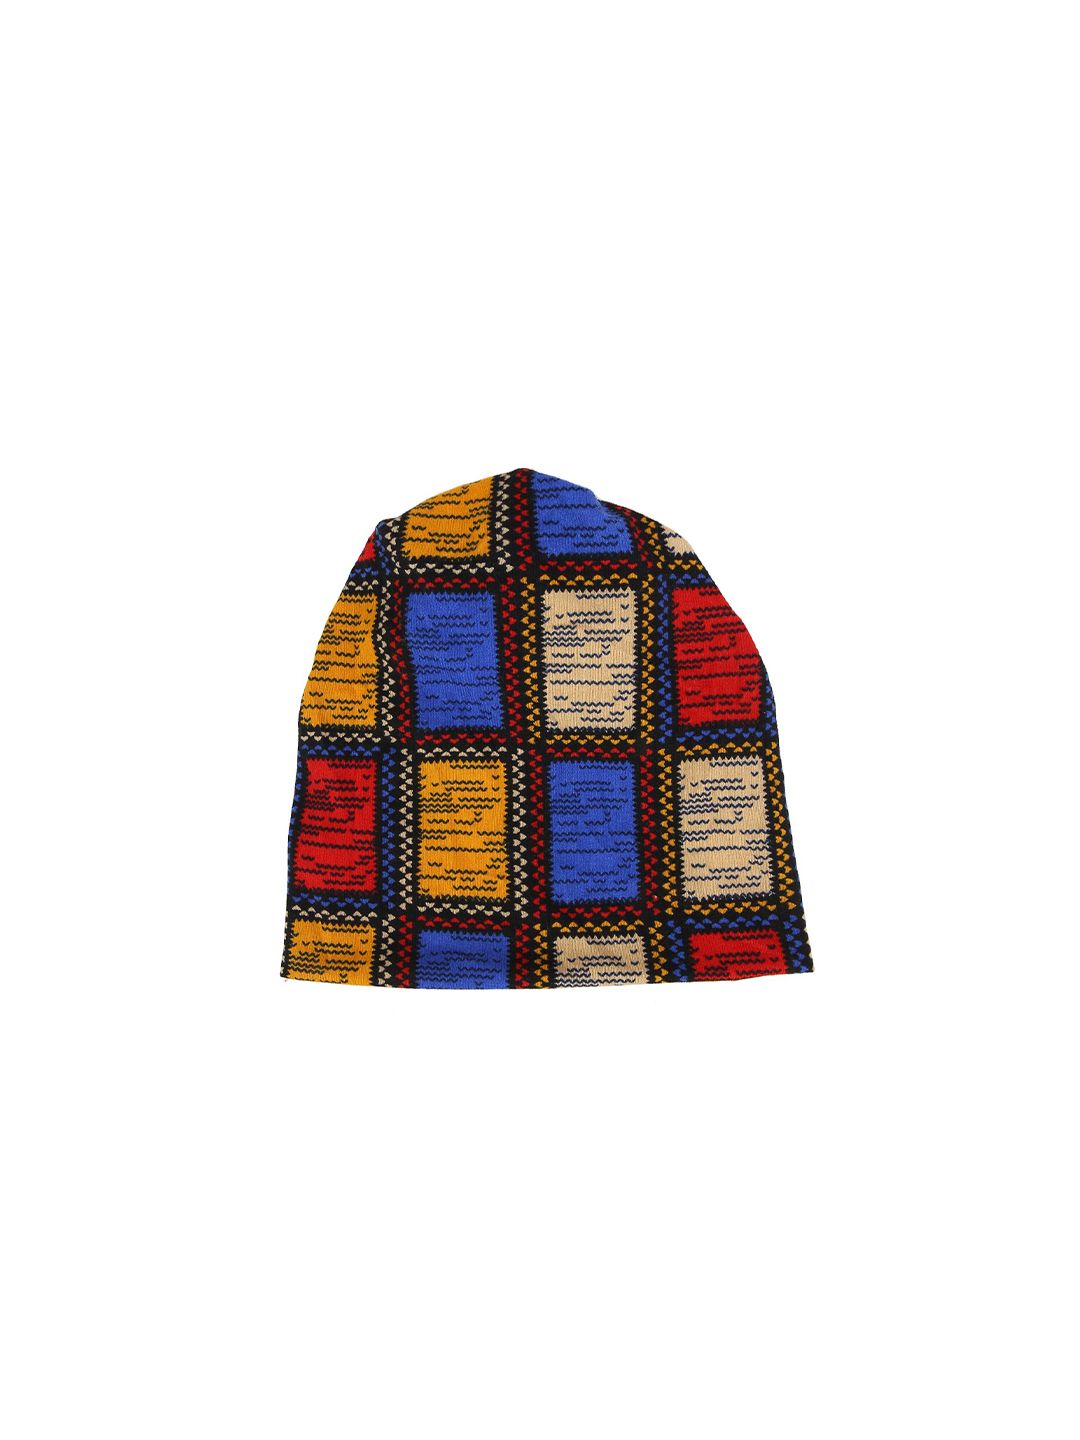 iSWEVEN Unisex Blue & Yellow Printed Cotton Beanie Cap Price in India